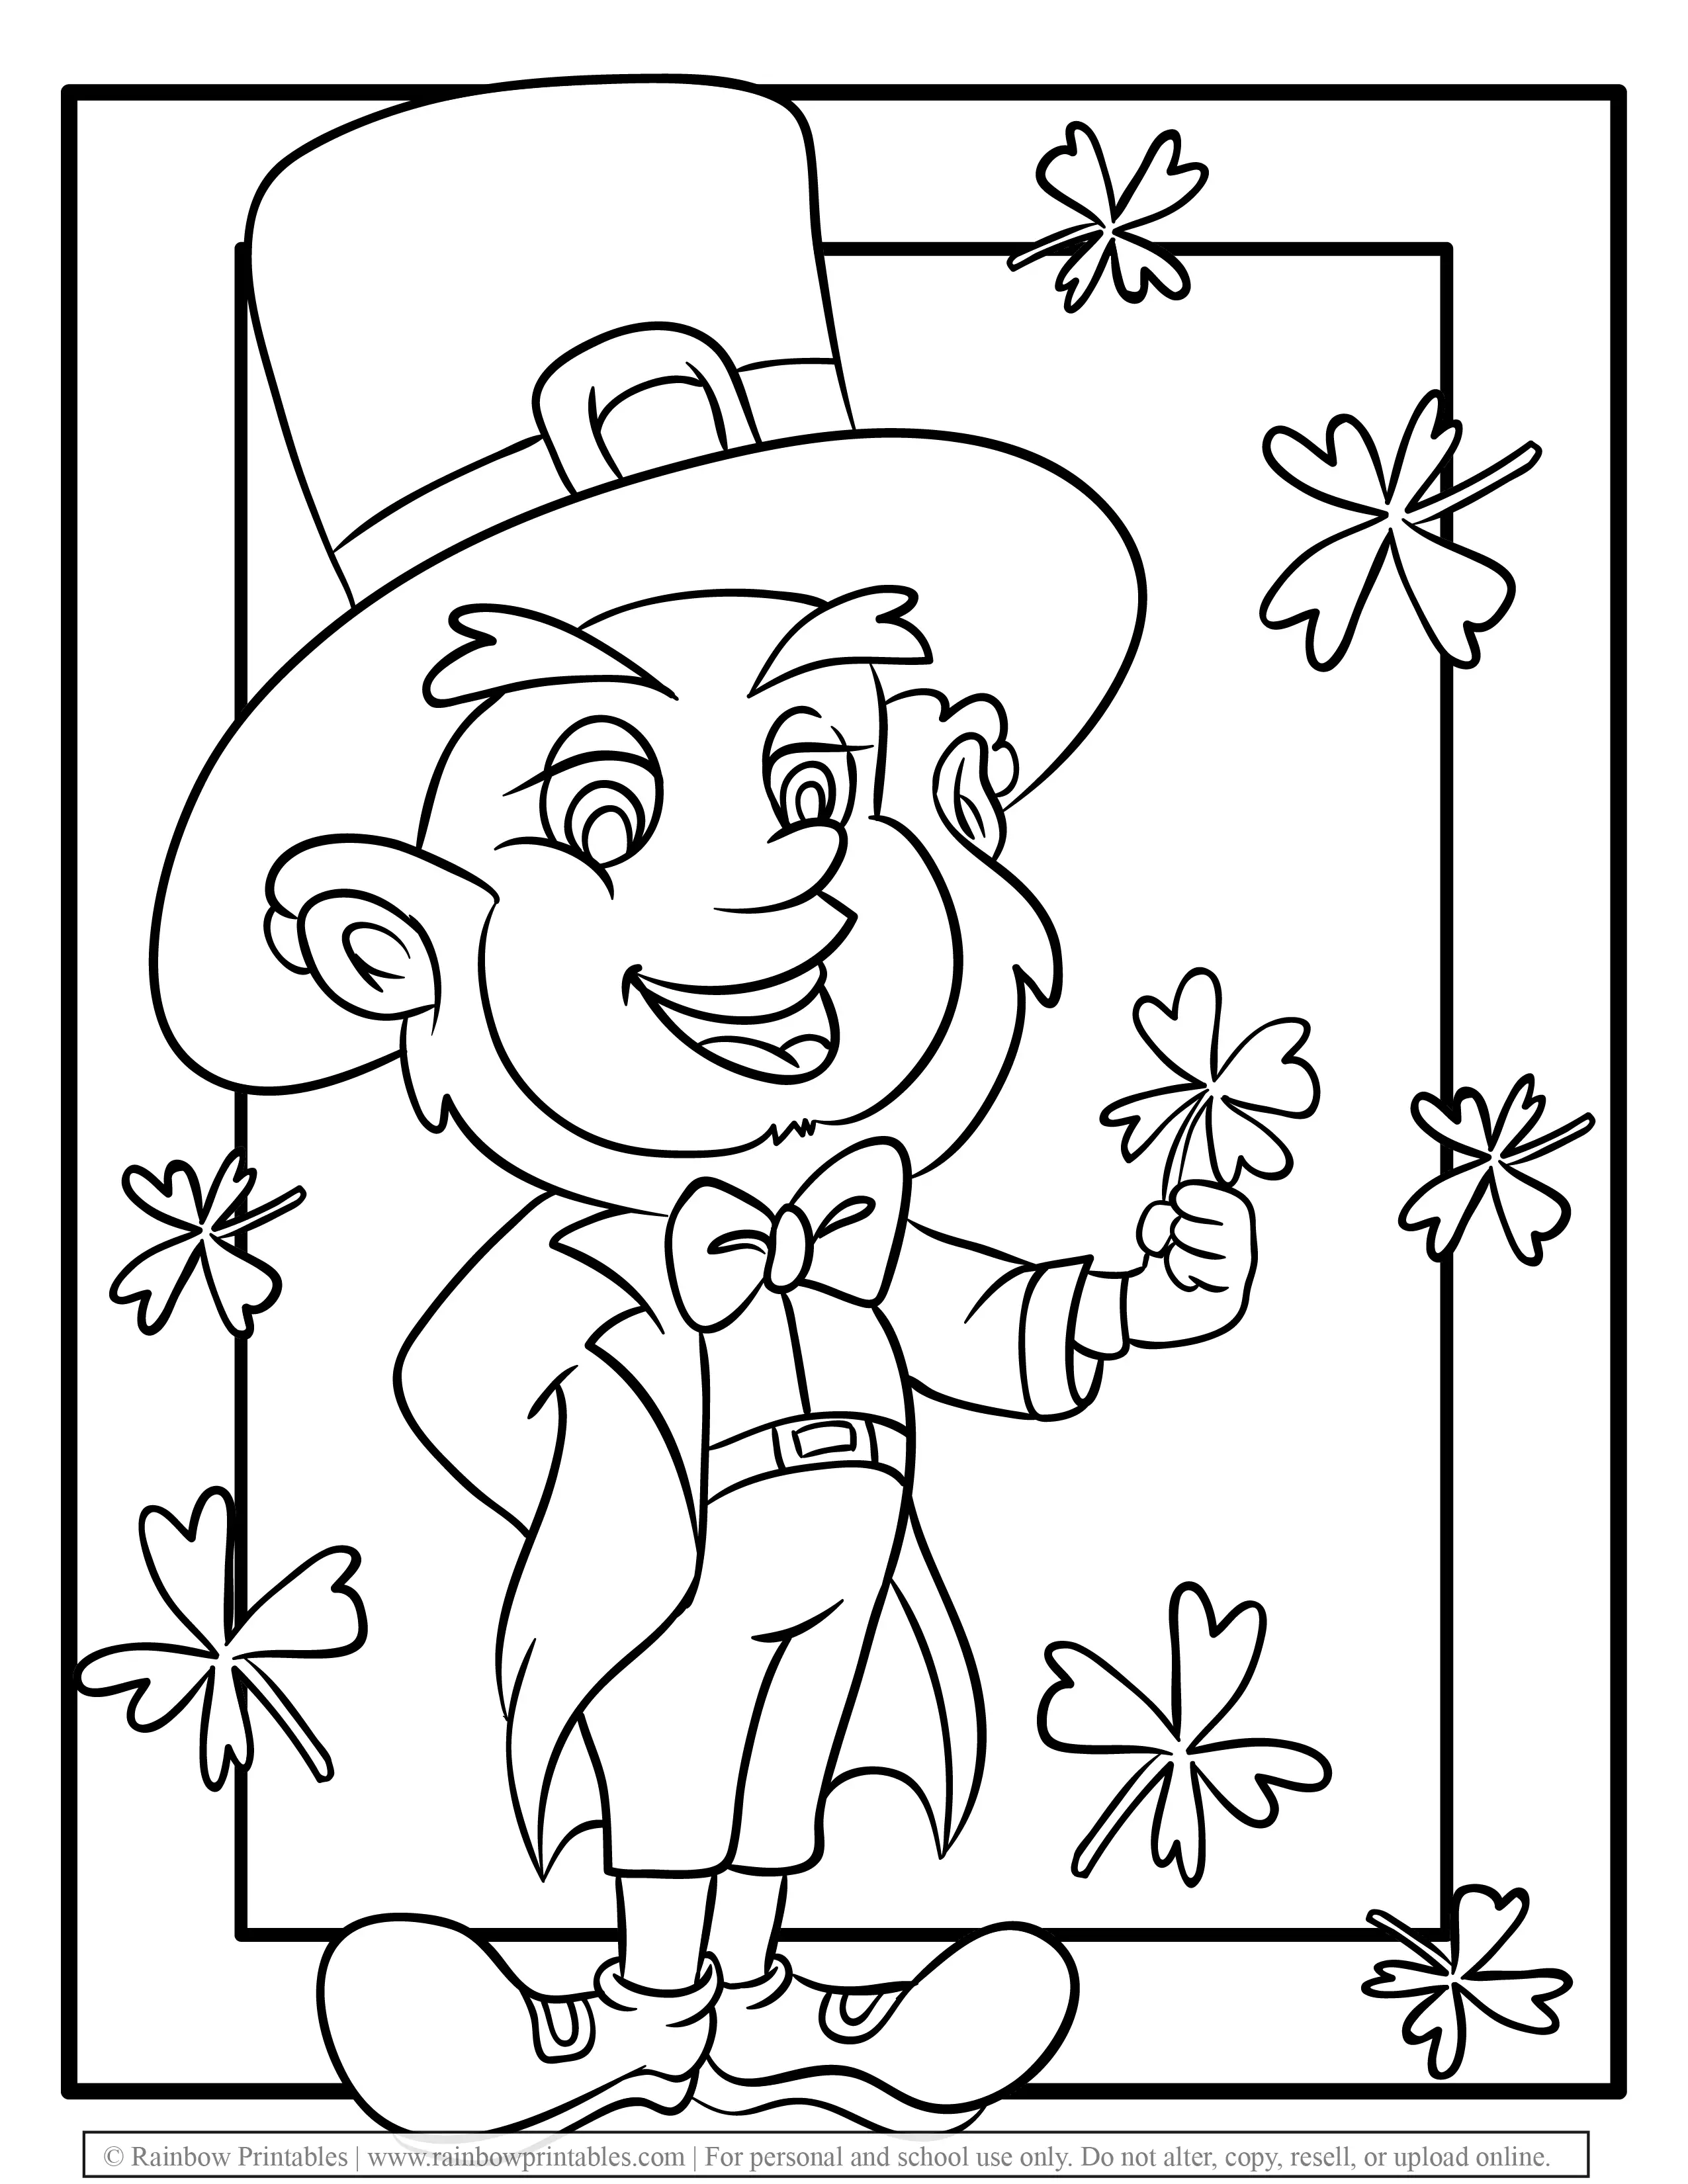 Free Coloring Pages for Kids Drawing Activities Line Art Illustration Leprechaun Pot of Gold Lucky 4 Clover Leaf St Patrick's Day